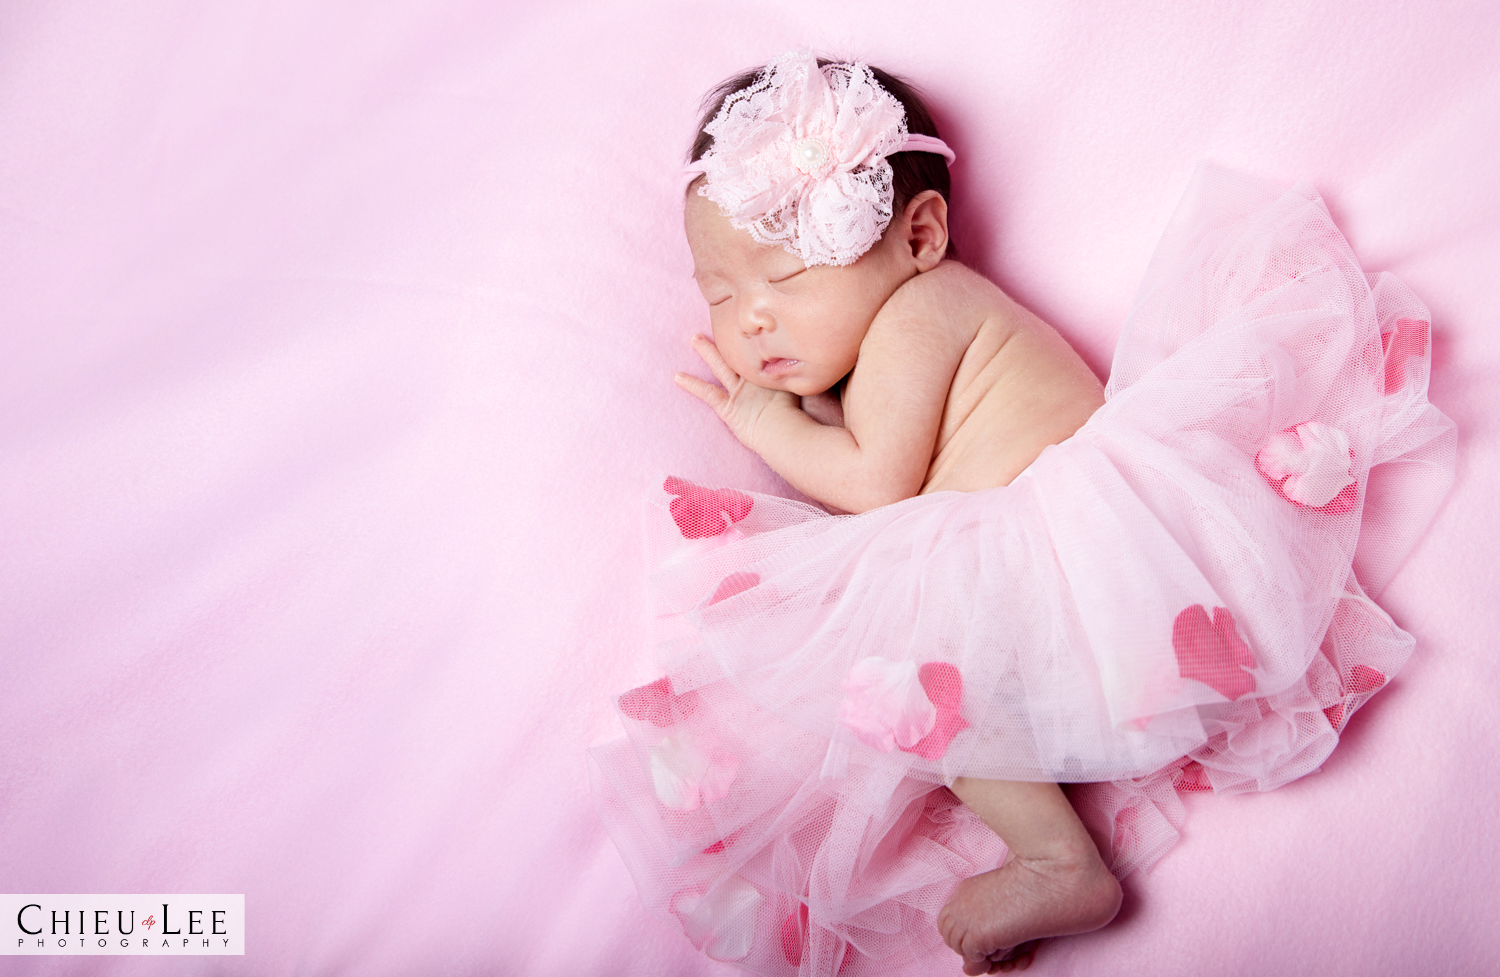 Newborn baby girl sleeping eyes closed full body lying on her side in a pink ballet tutu dress and white lace bow headband with flower petals